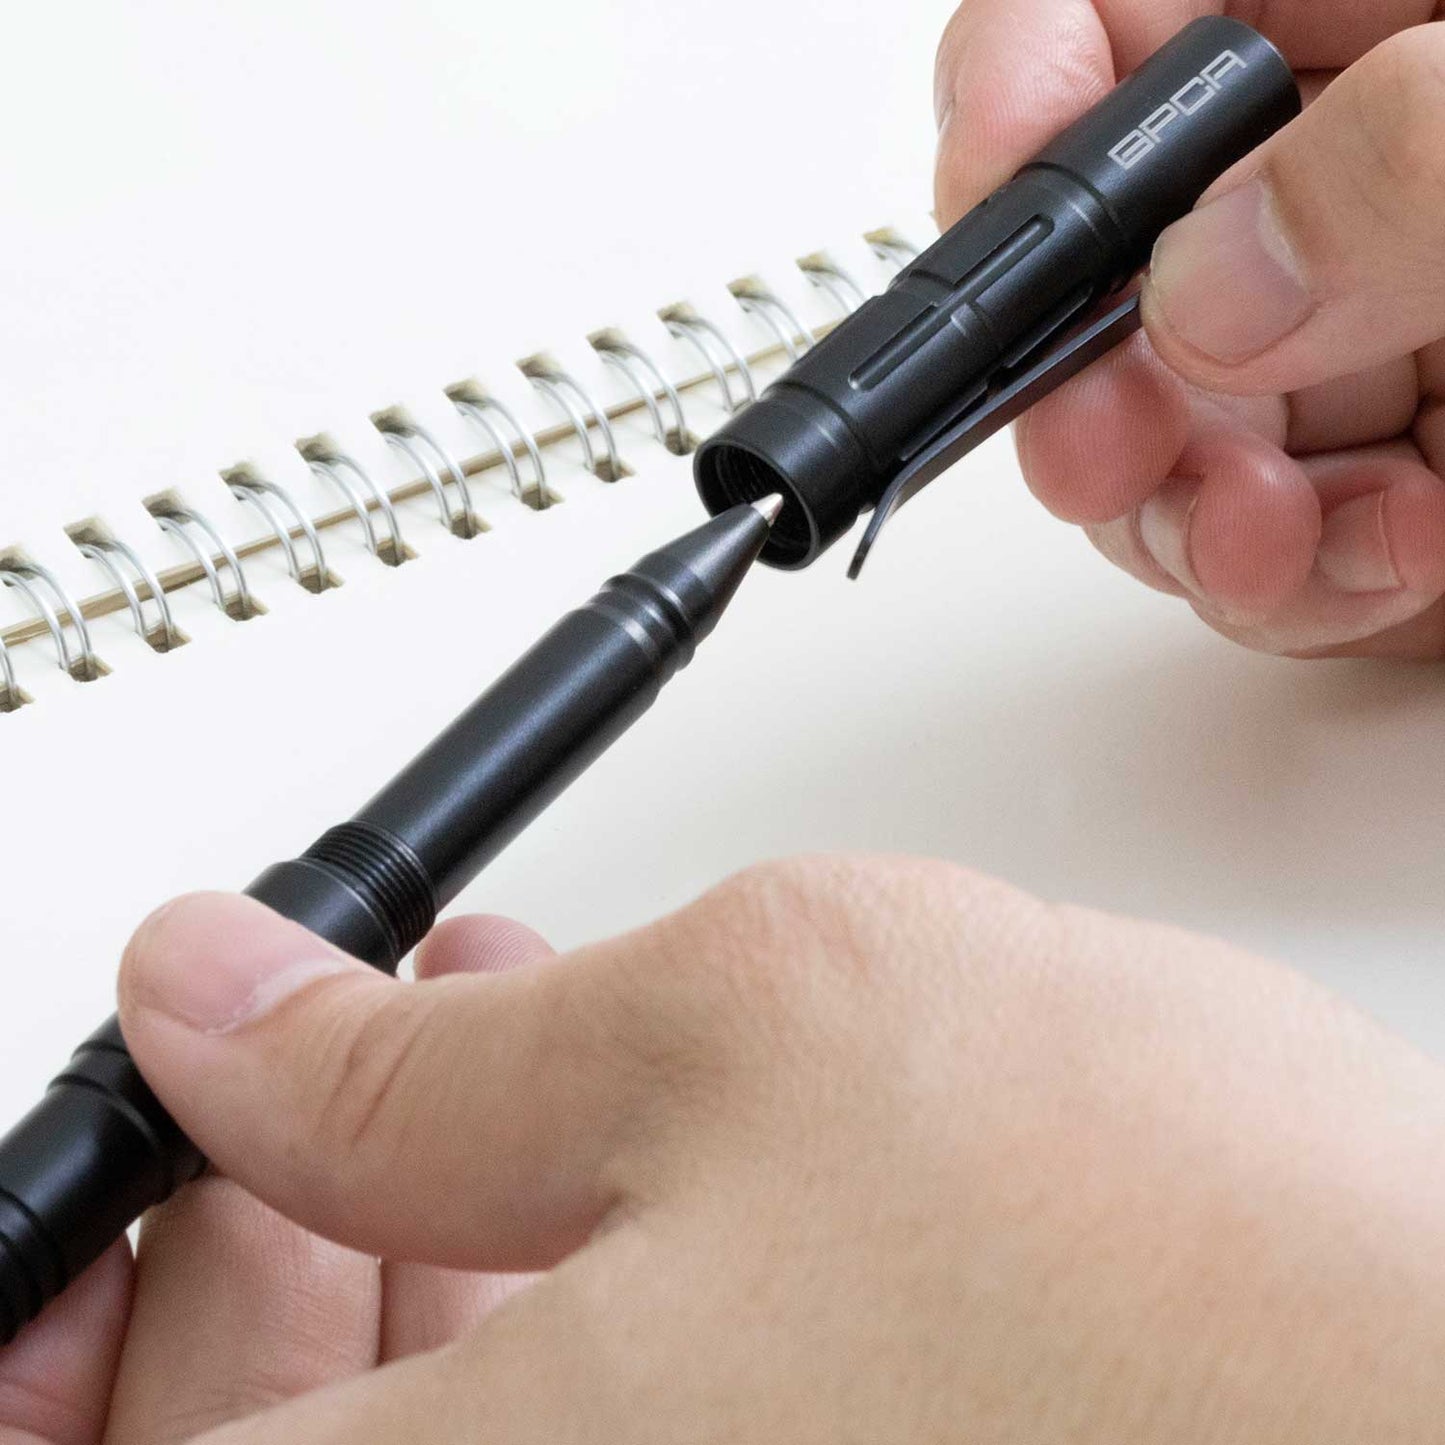 GPCA G1 Multitool Pen, for safety and for writing